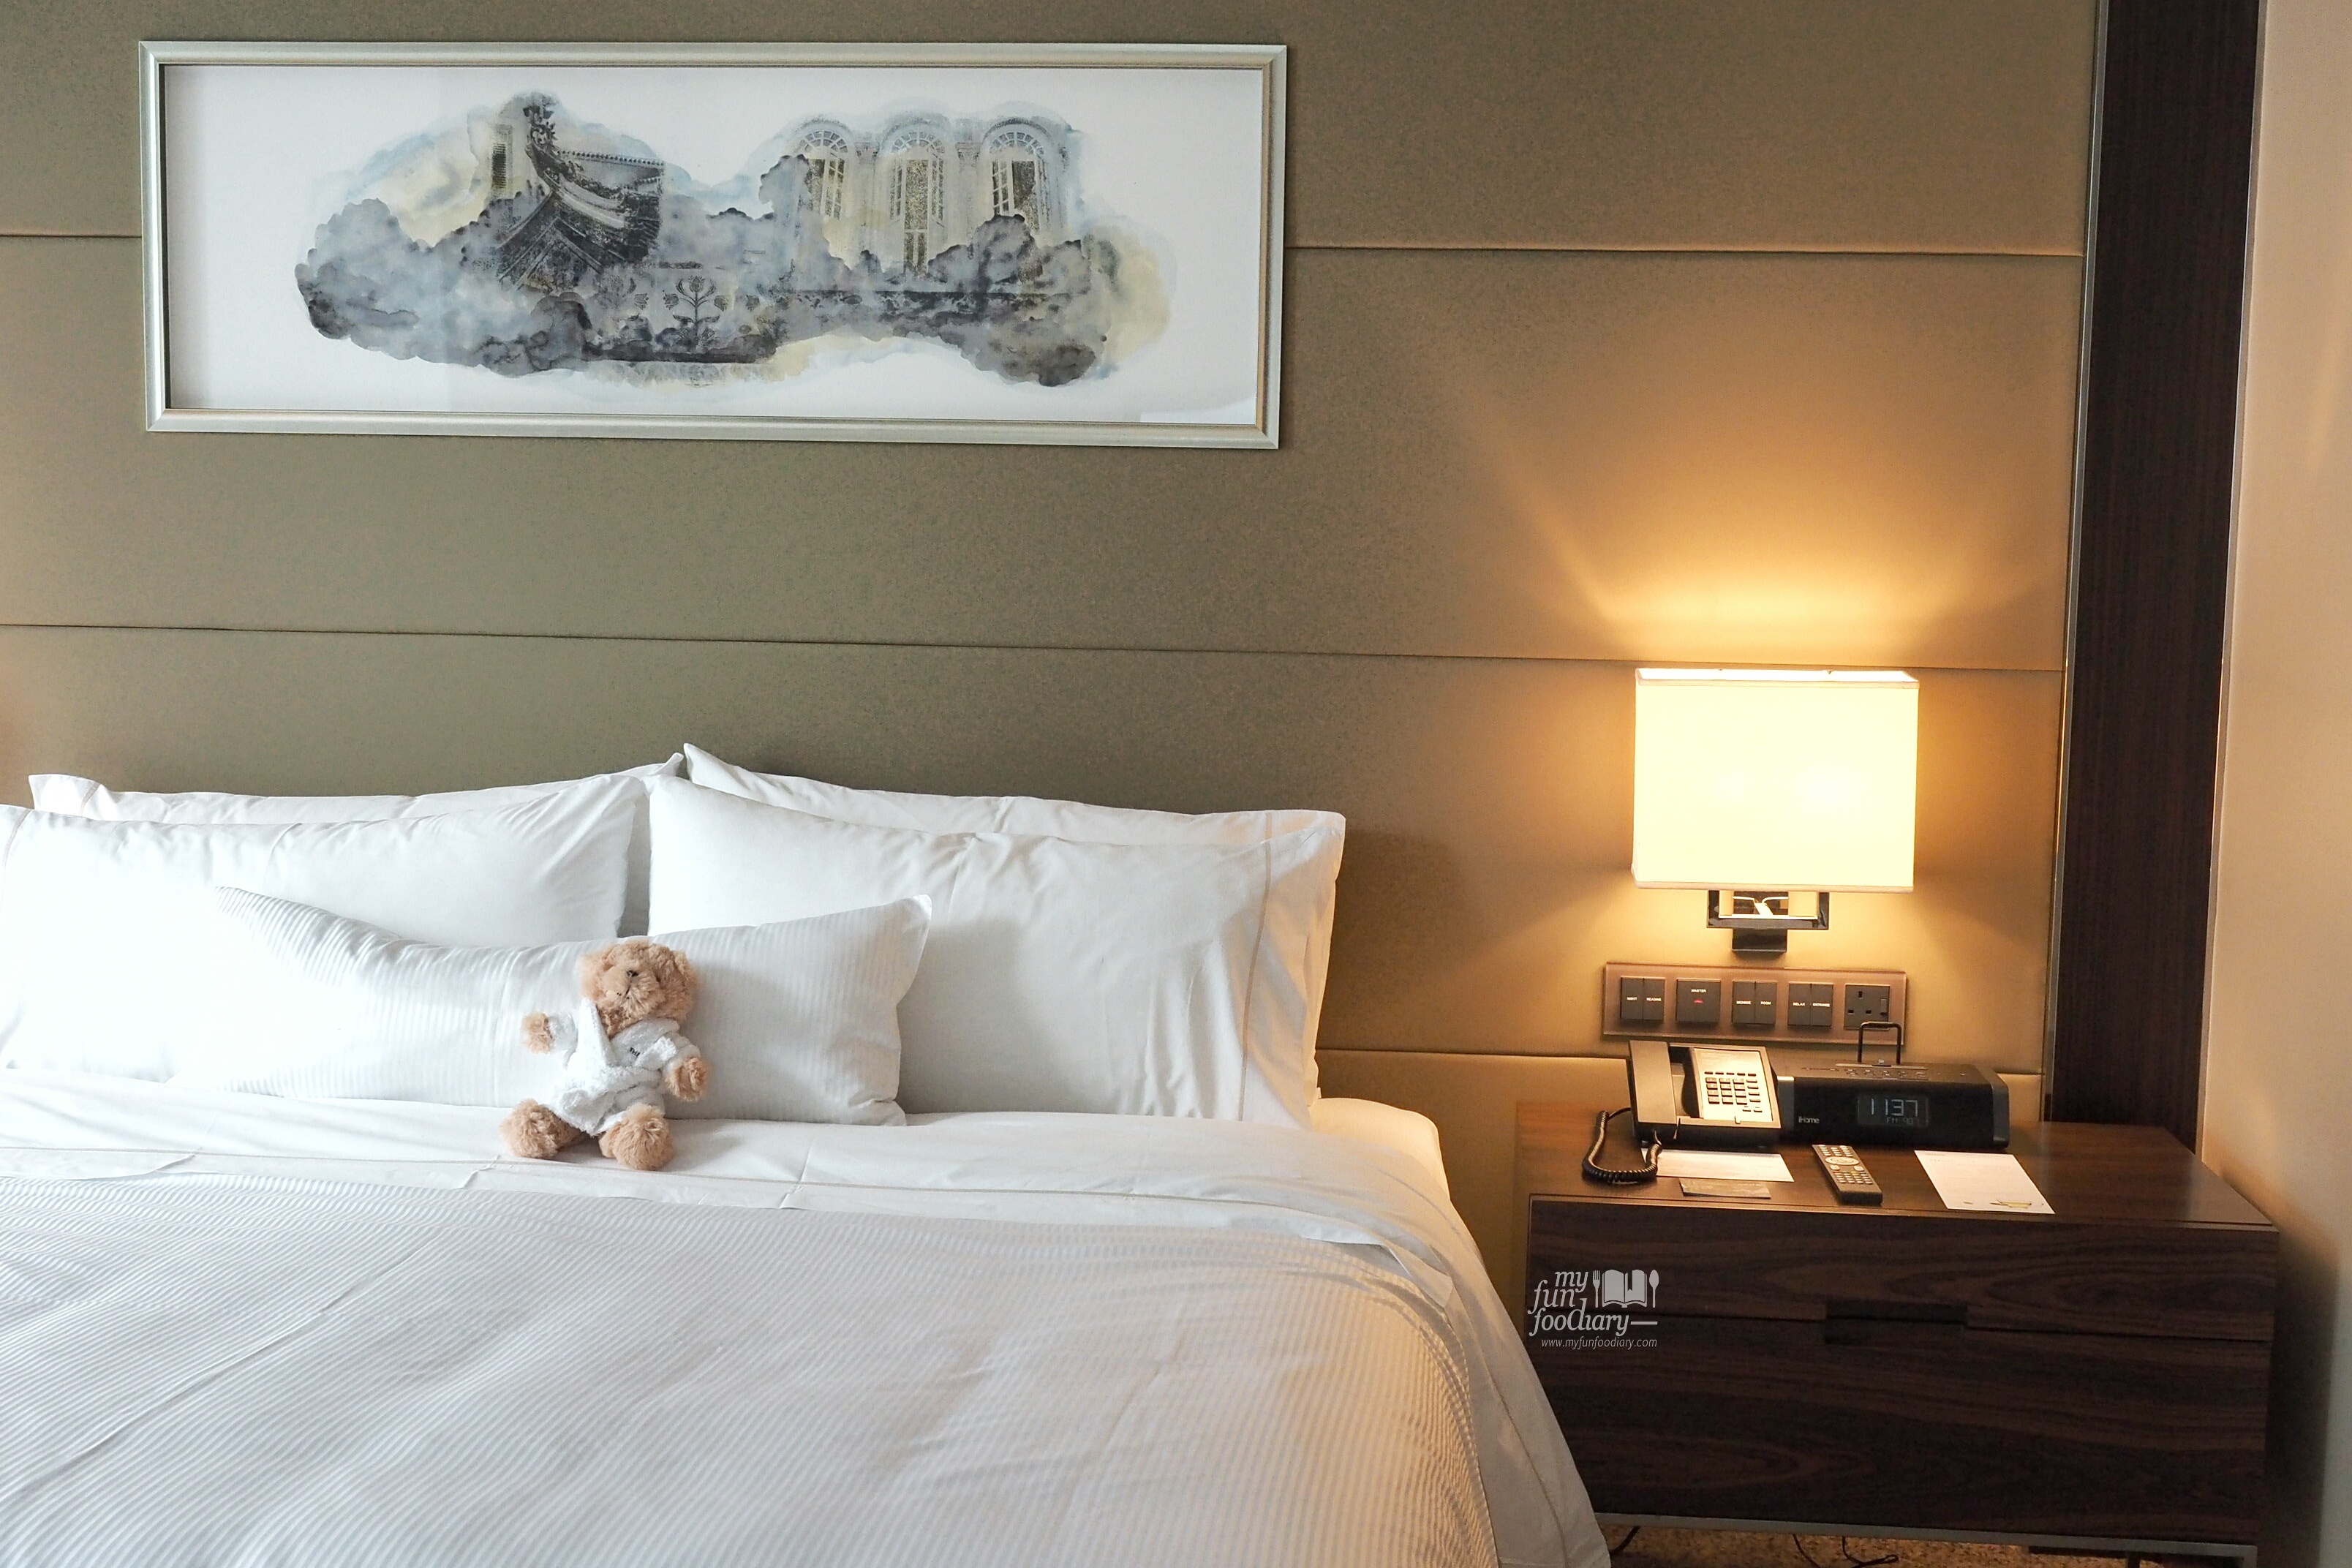 Super comfortable Heavenly Bed King Size at Westin Singapore by Myfunfoodiary